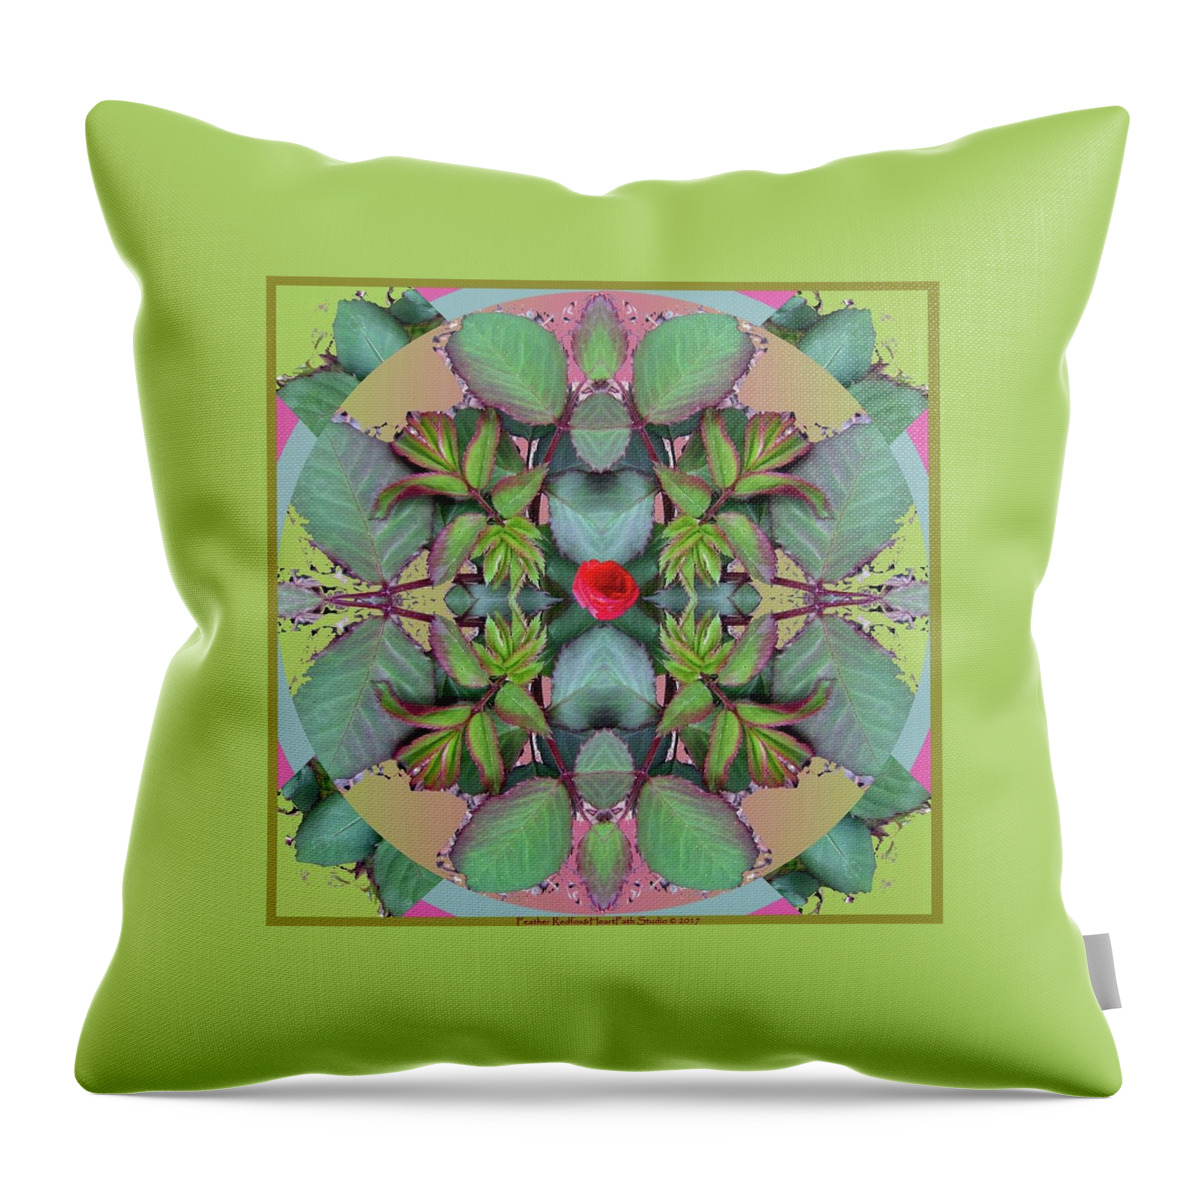 Rose Leaf Mandala Throw Pillow featuring the photograph Rose Leaf Mandala by Feather Redfox